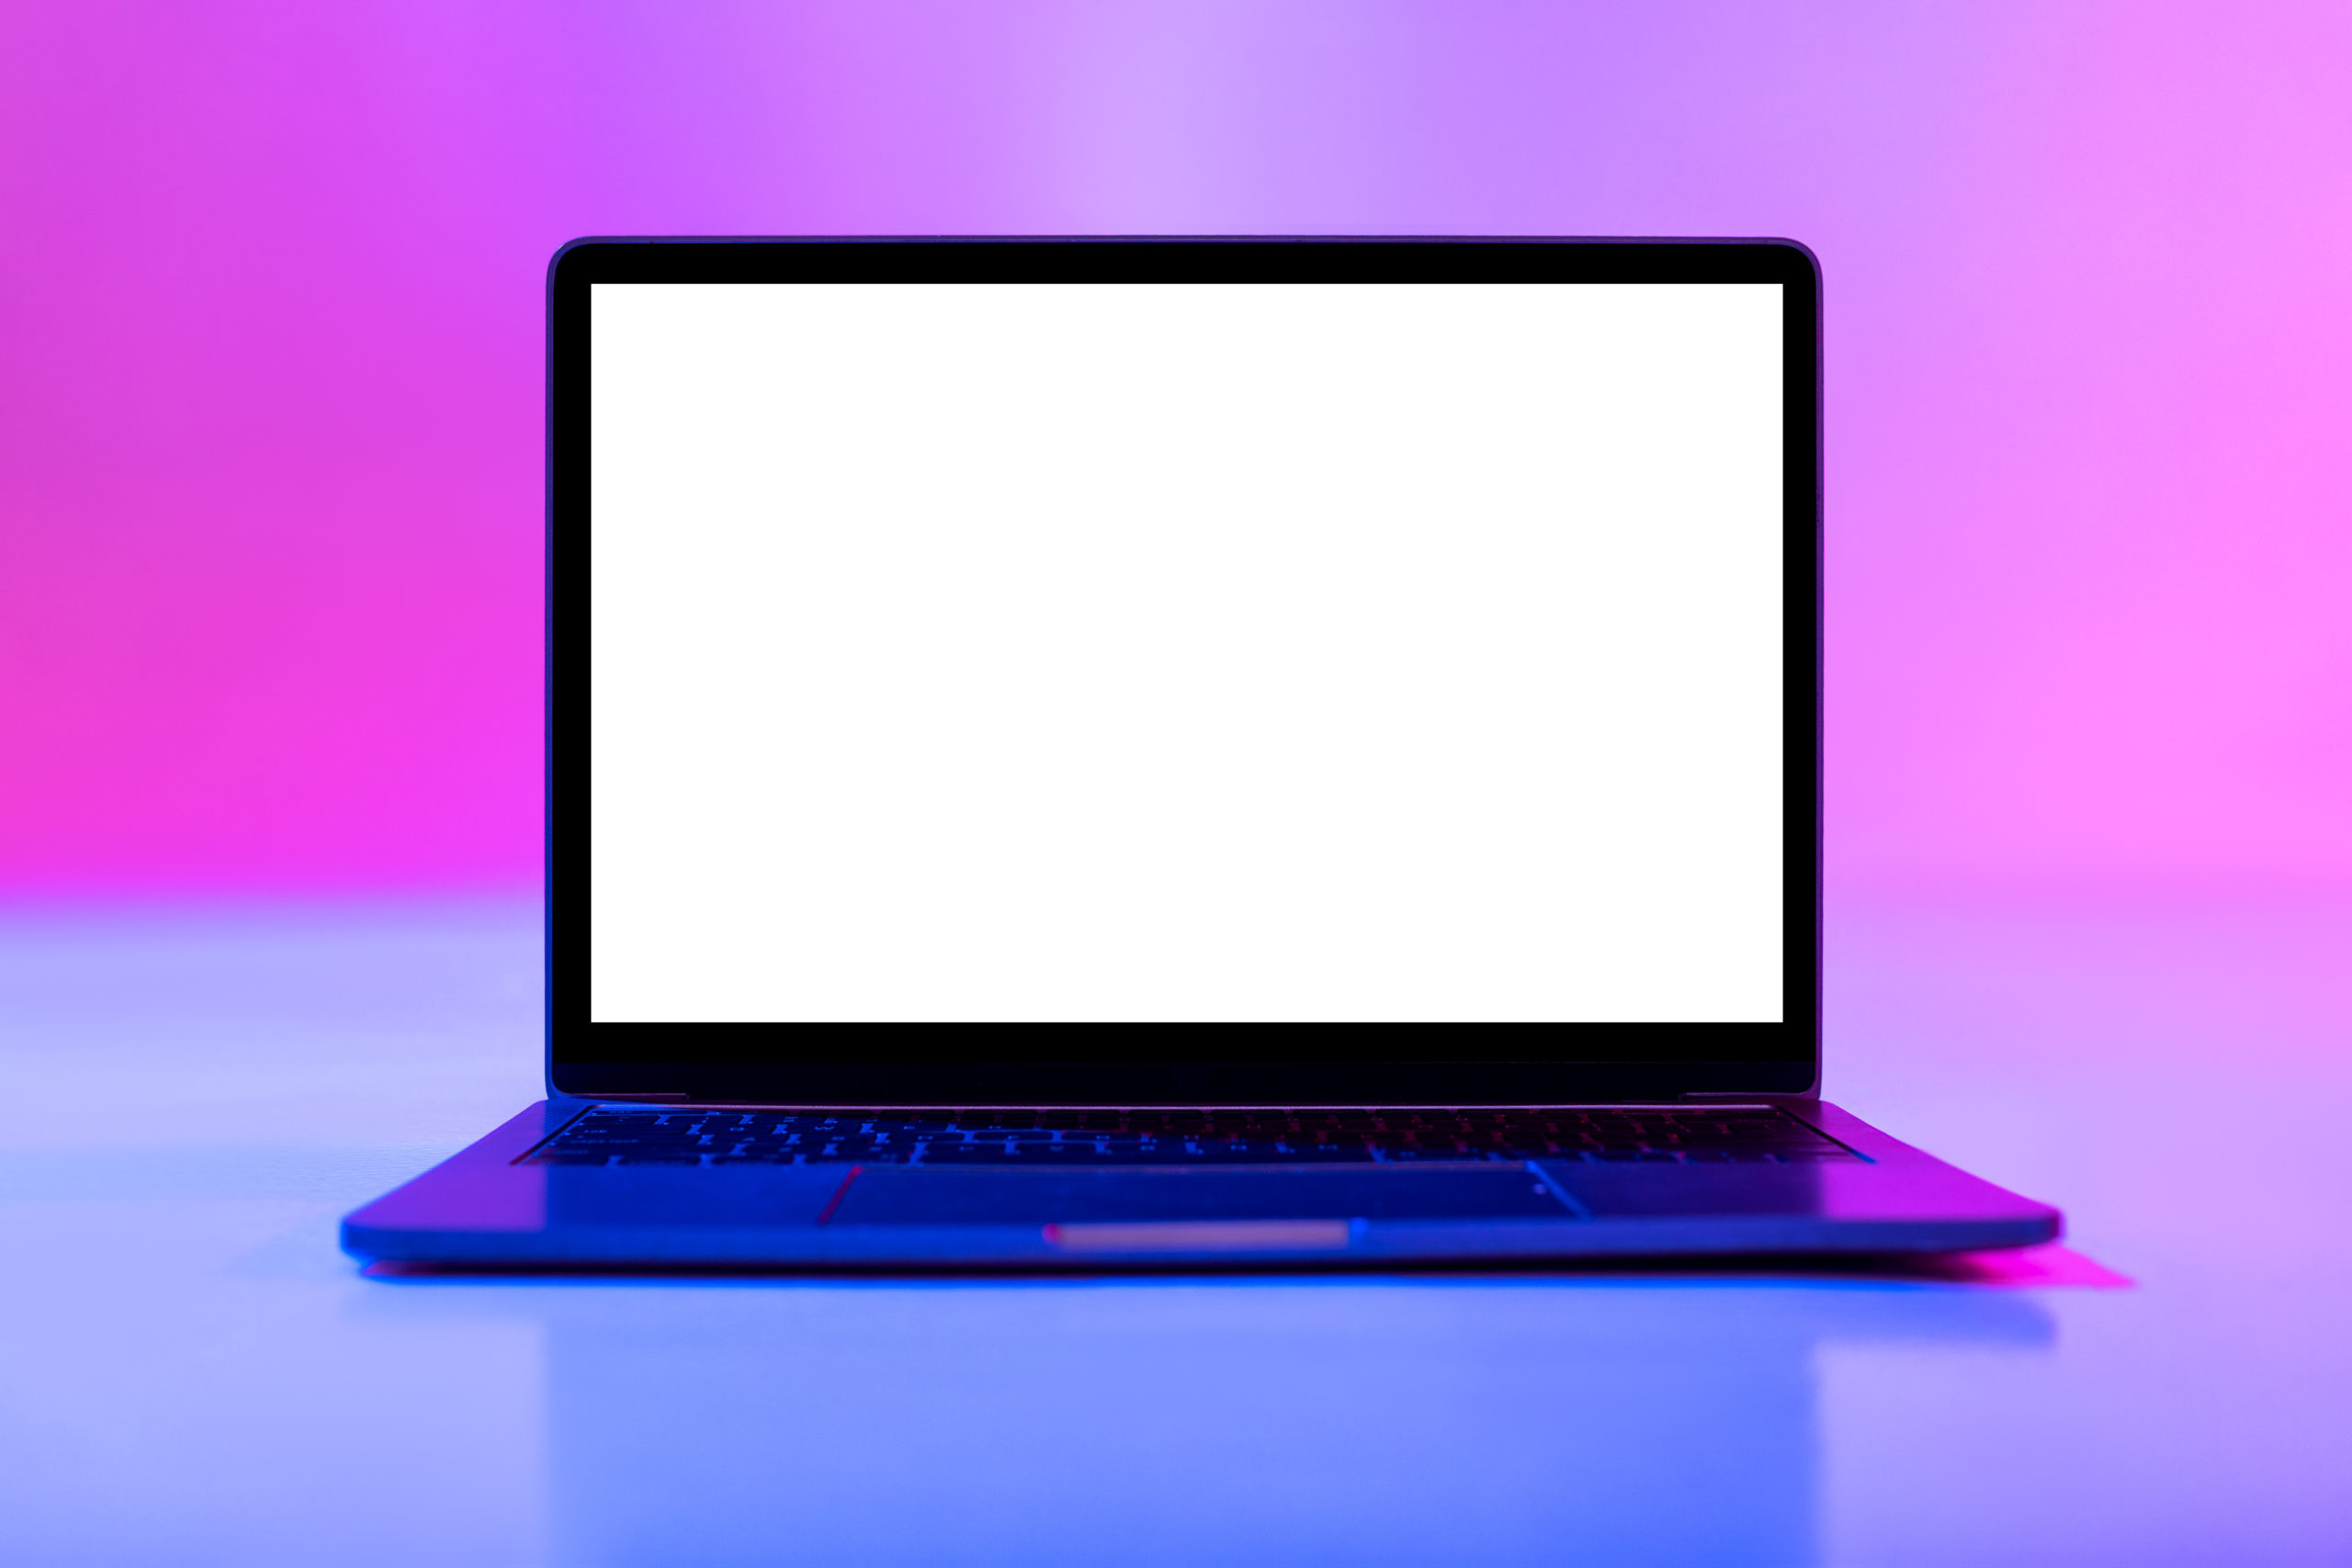 Laptop computer with blank white screen in neon light, mockup for desktop or website. Modern portable pc with empty space for your advertisement. Graphic user interface template